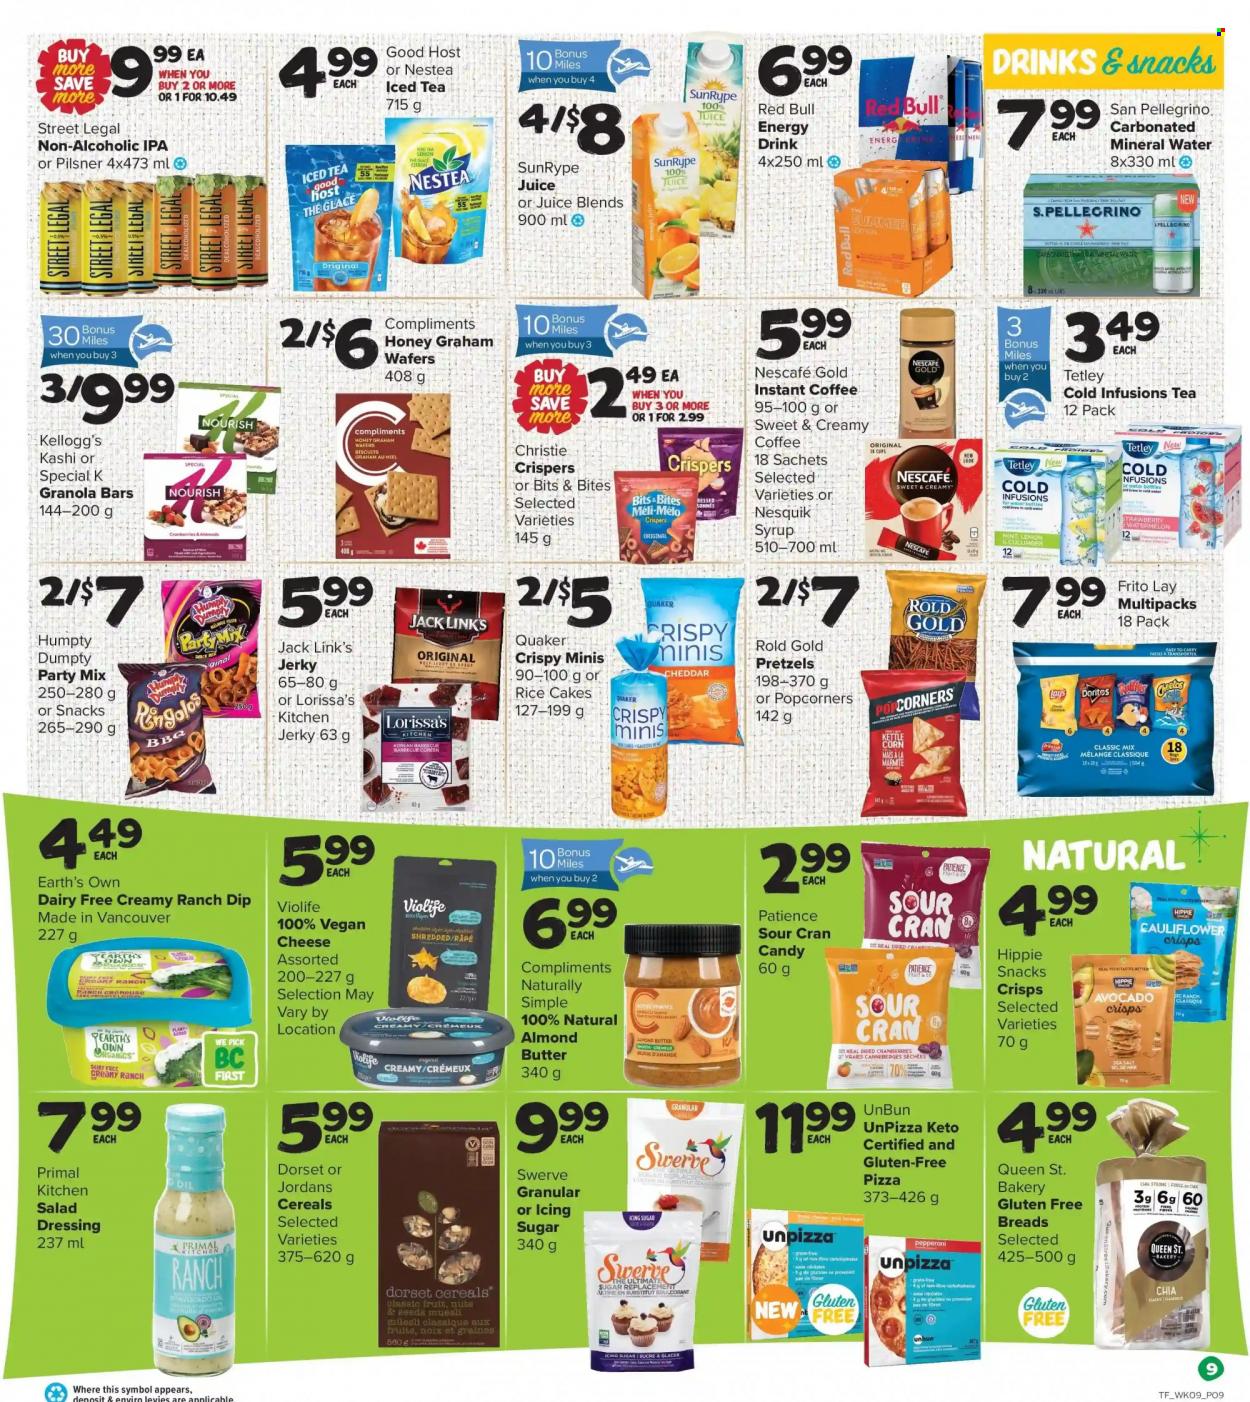 thumbnail - Thrifty Foods Flyer - June 30, 2022 - July 06, 2022 - Sales products - pretzels, avocado, watermelon, pizza, Quaker, jerky, pepperoni, almond butter, dip, wafers, Kellogg's, biscuit, Doritos, kettle corn, Lay’s, popcorn, Jack Link's, sugar, icing sugar, cranberries, cereals, granola bar, muesli, salad dressing, dressing, honey, syrup, dried fruit, juice, energy drink, ice tea, Red Bull, mineral water, San Pellegrino, instant coffee, IPA, drink bottle, Primal, Nescafé, Nesquik. Page 9.